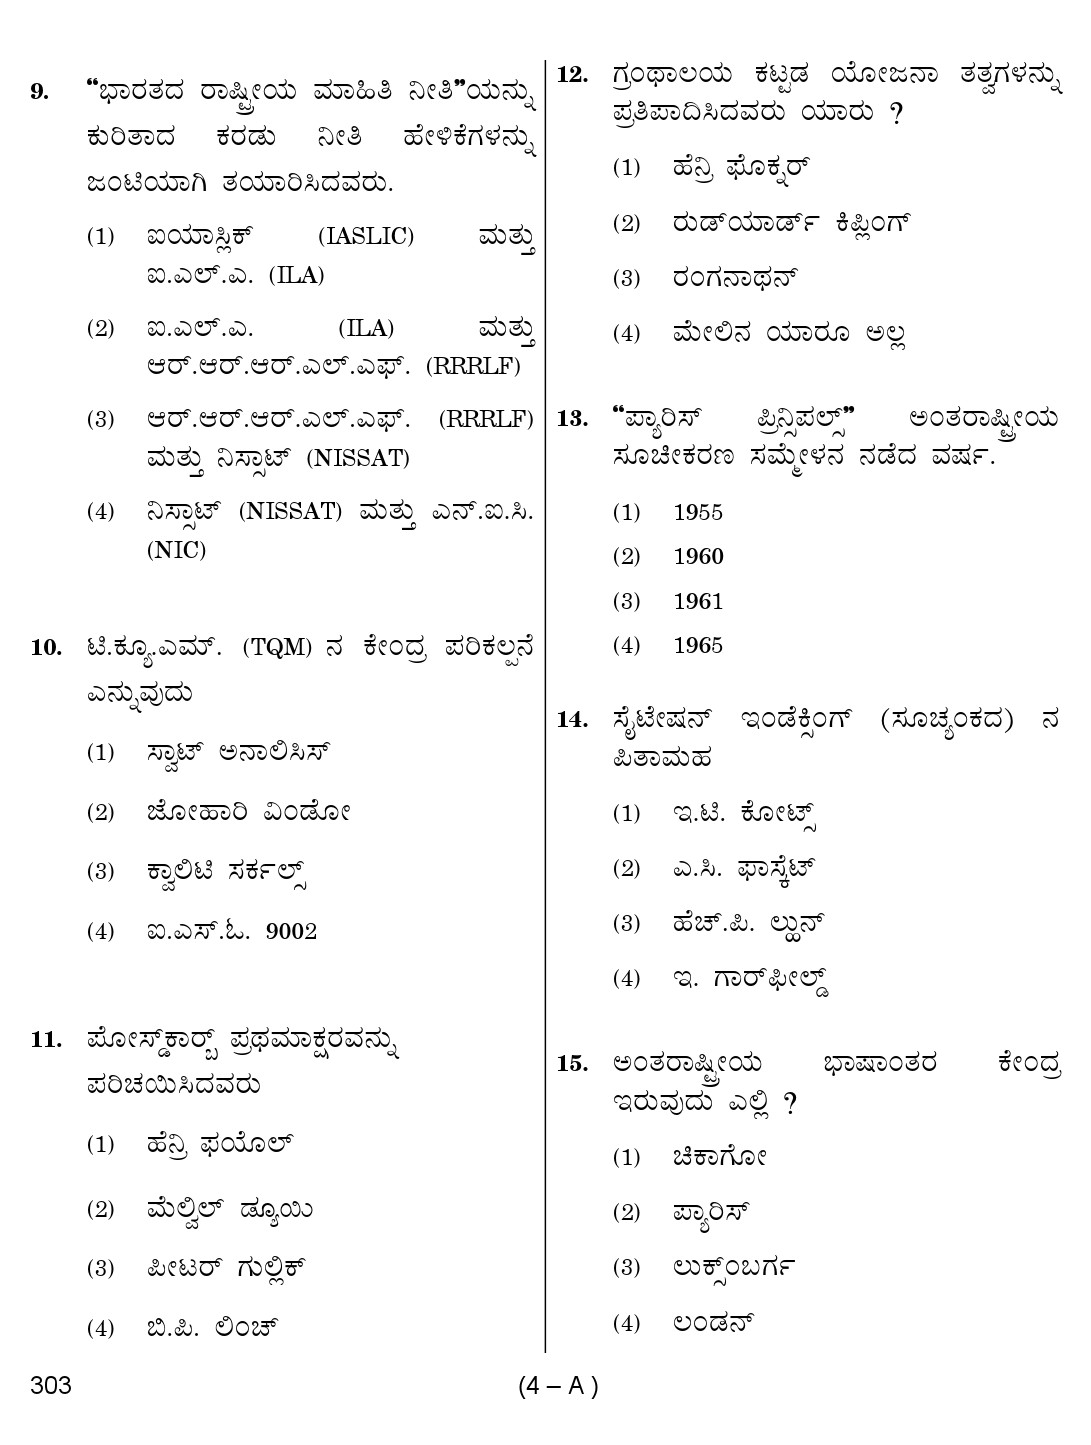 Karnataka PSC 303 Specific Paper II Librarian Exam Sample Question Paper 4